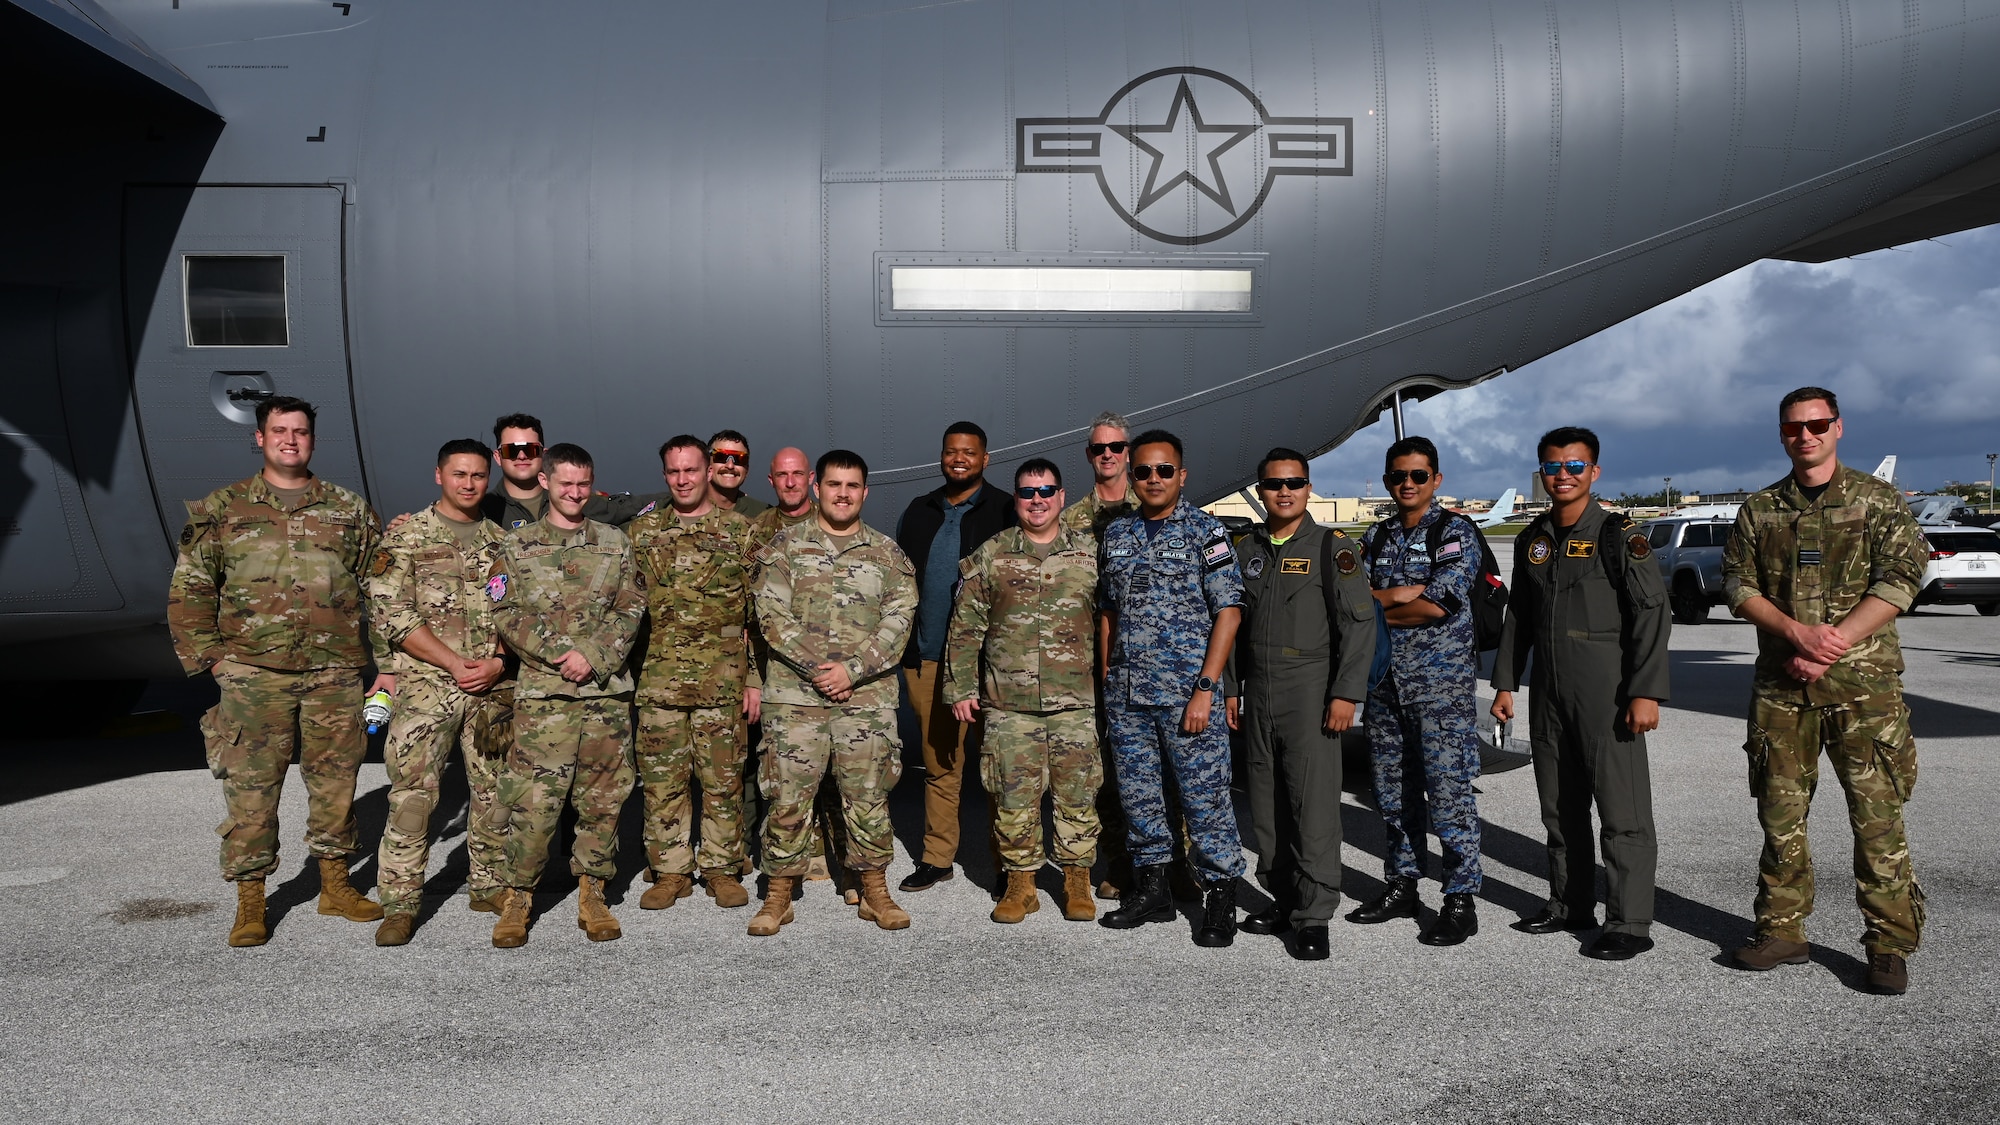 U.S. Air Force Airmen pose for a group photo with foreign allies in front of a C-130J Super Hercules.